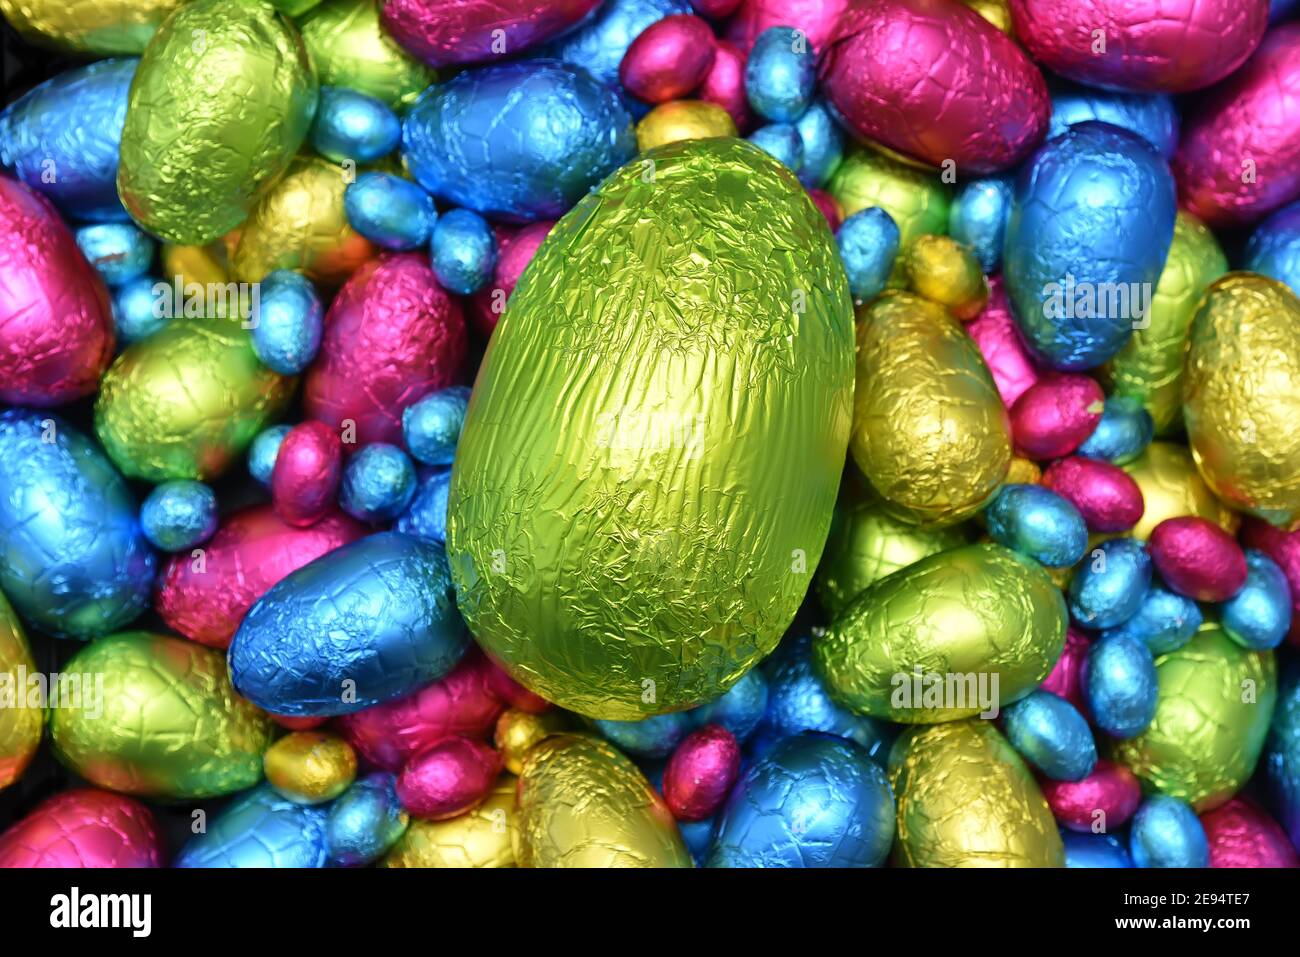 Pile or group of multi colored and different sizes of colourful foil wrapped chocolate easter eggs in pink, blue, yellow and lime green with a large g Stock Photo